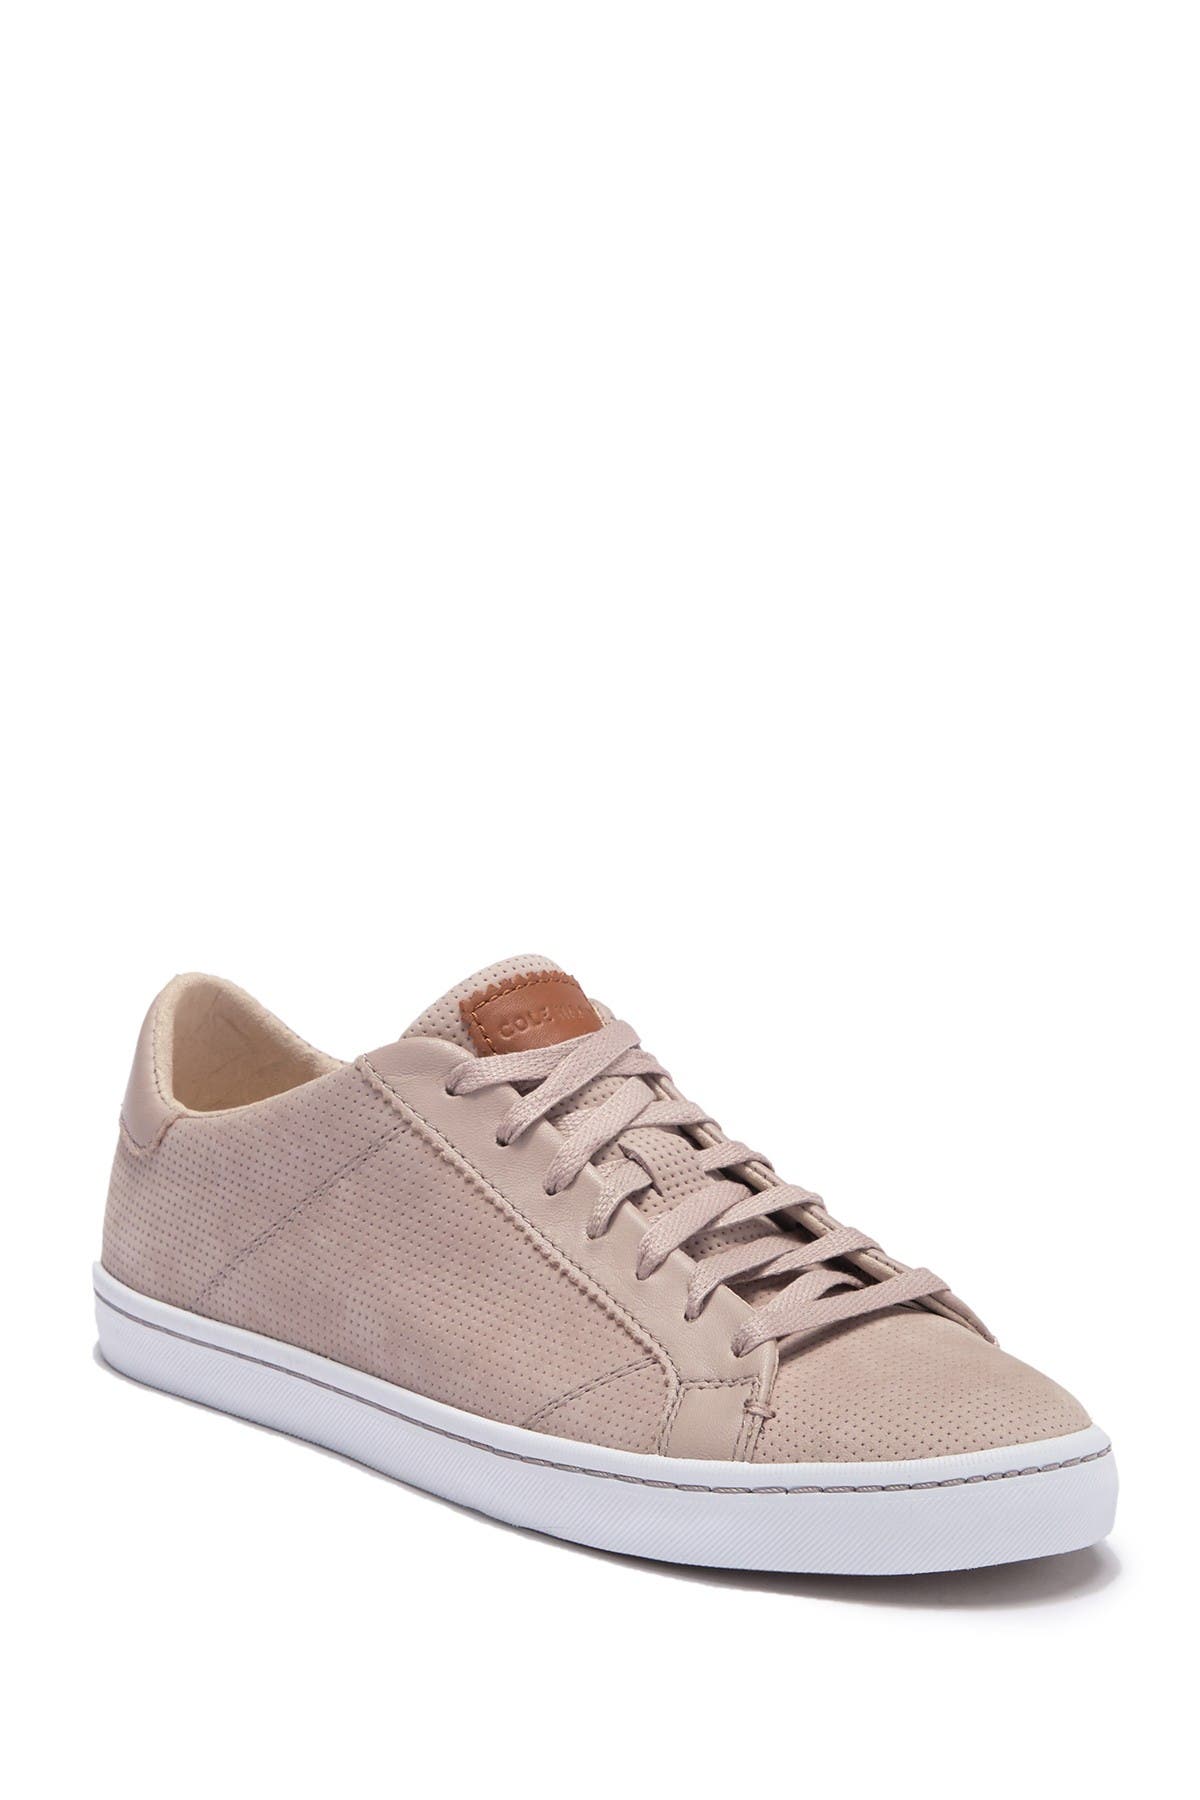 cole haan margo lace up white